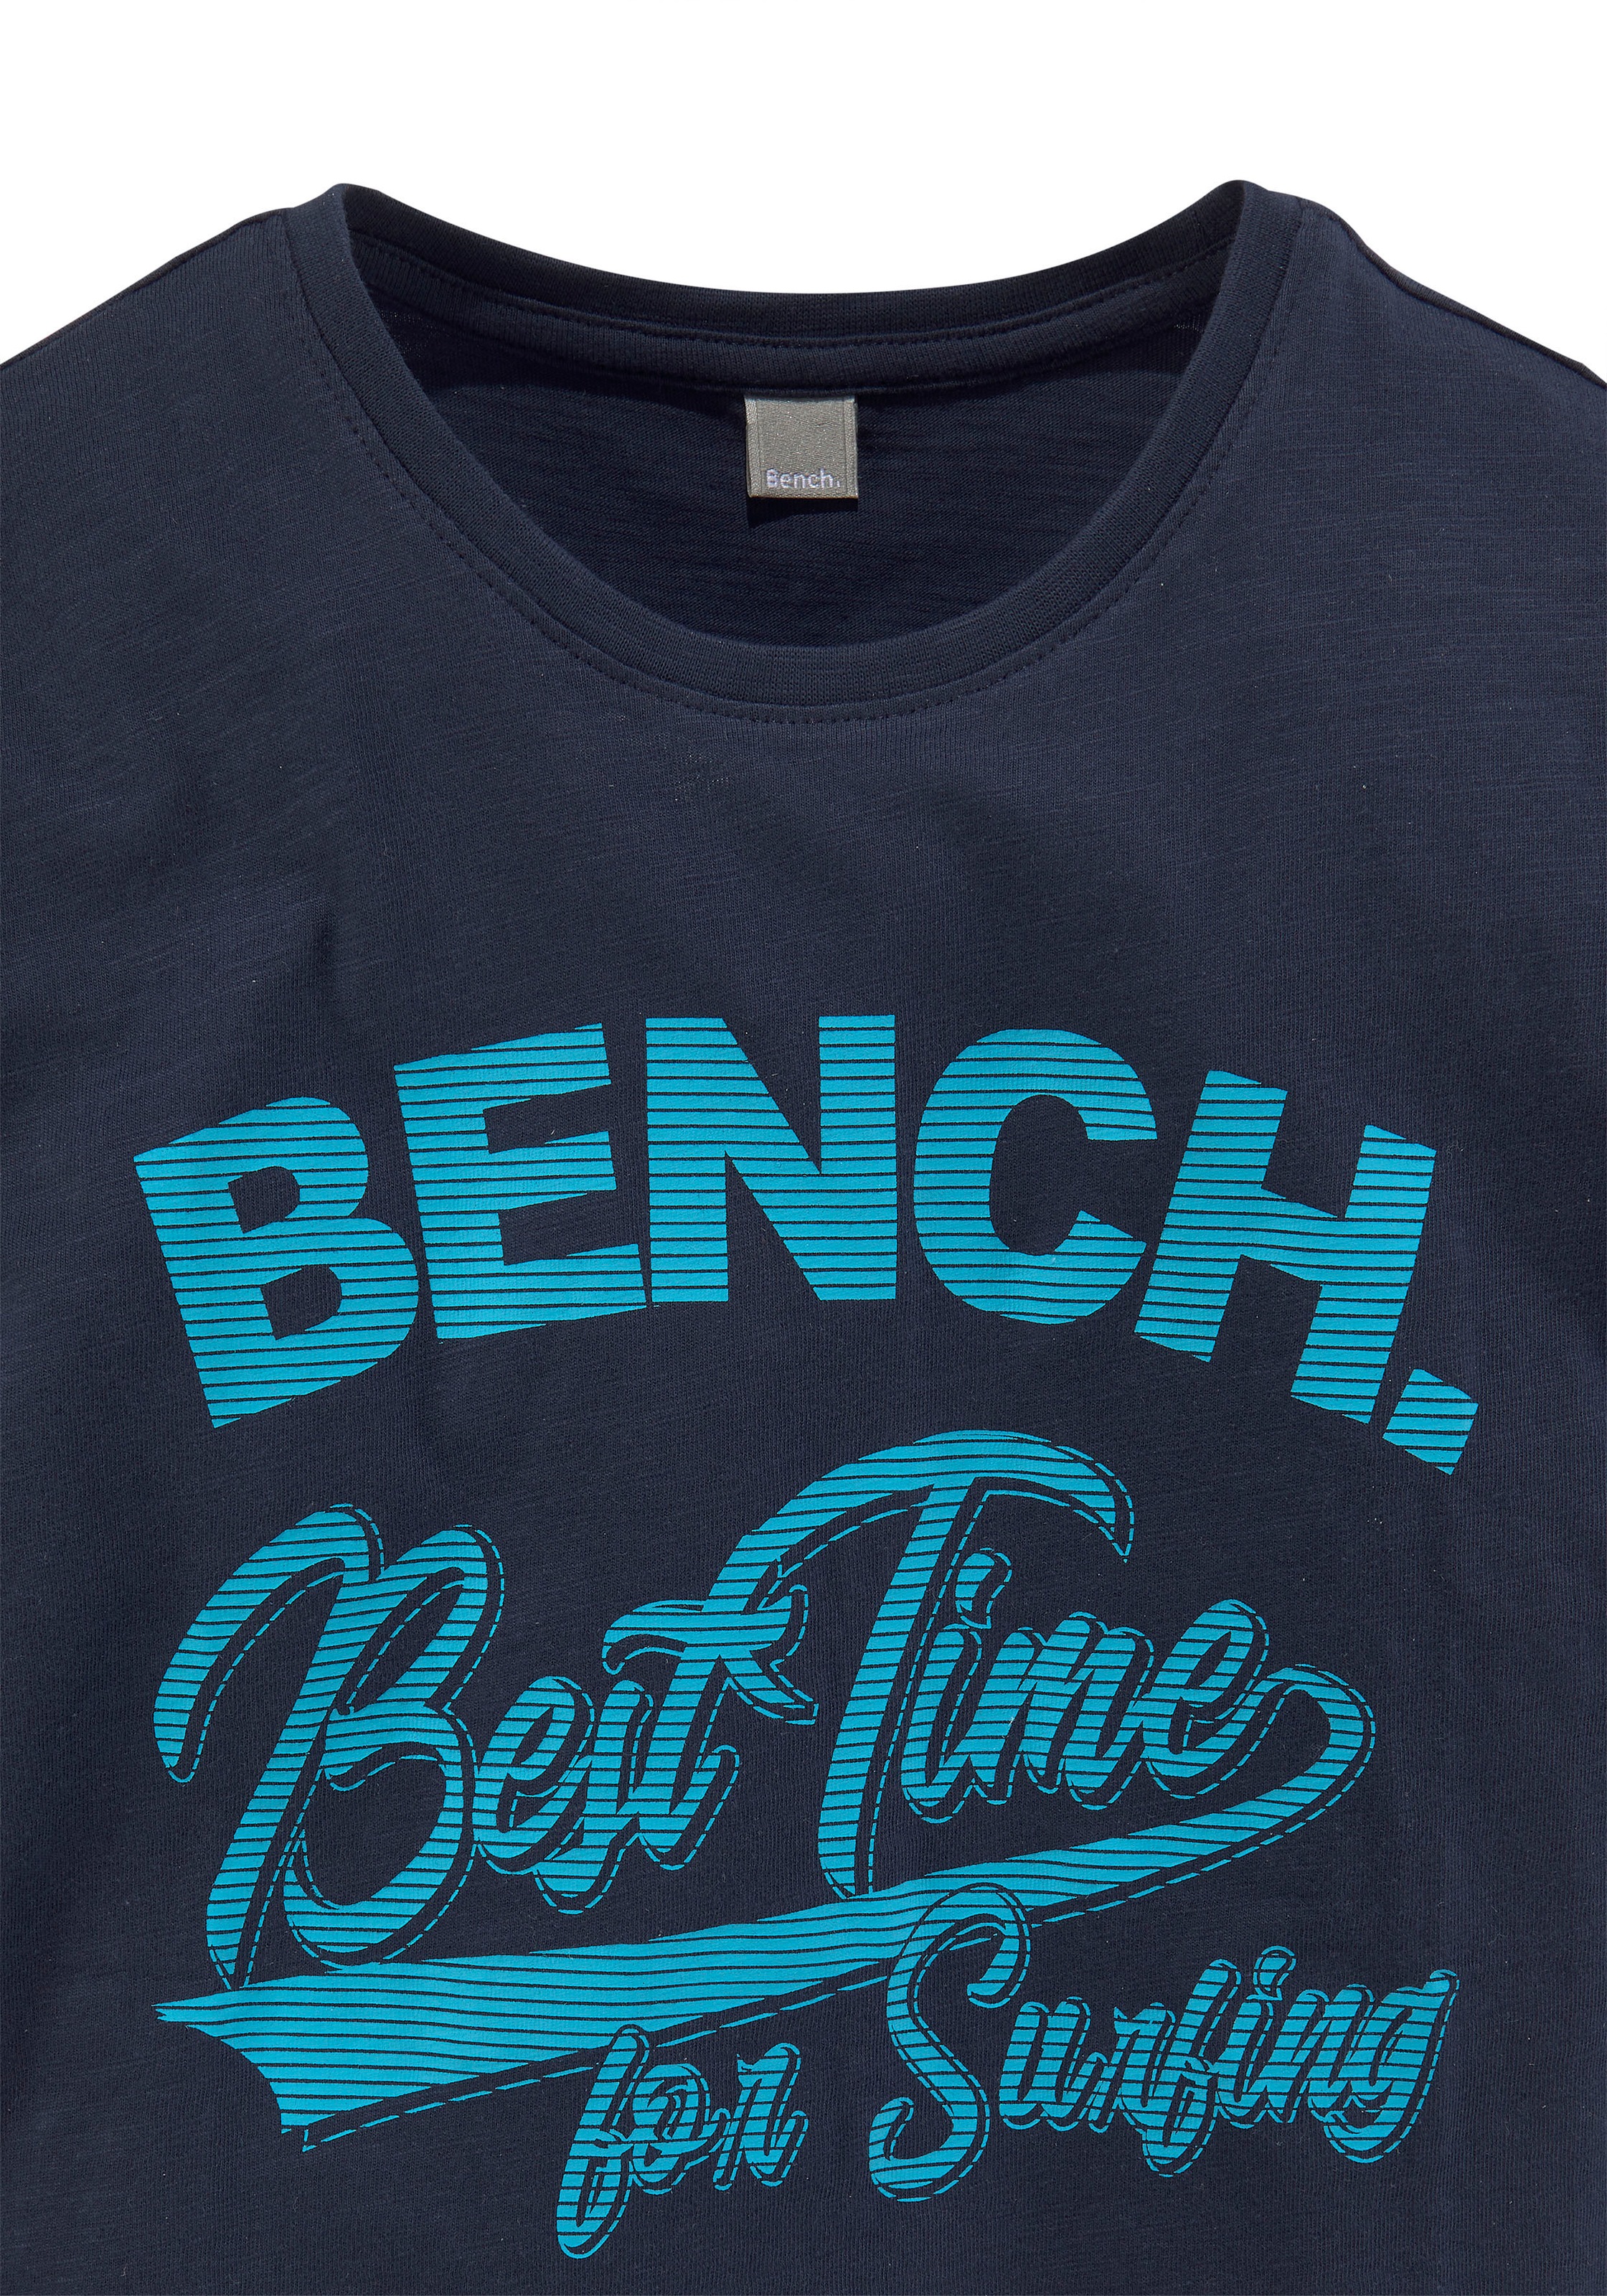 »Best surfing« time for T-Shirt OTTO bei Bench.